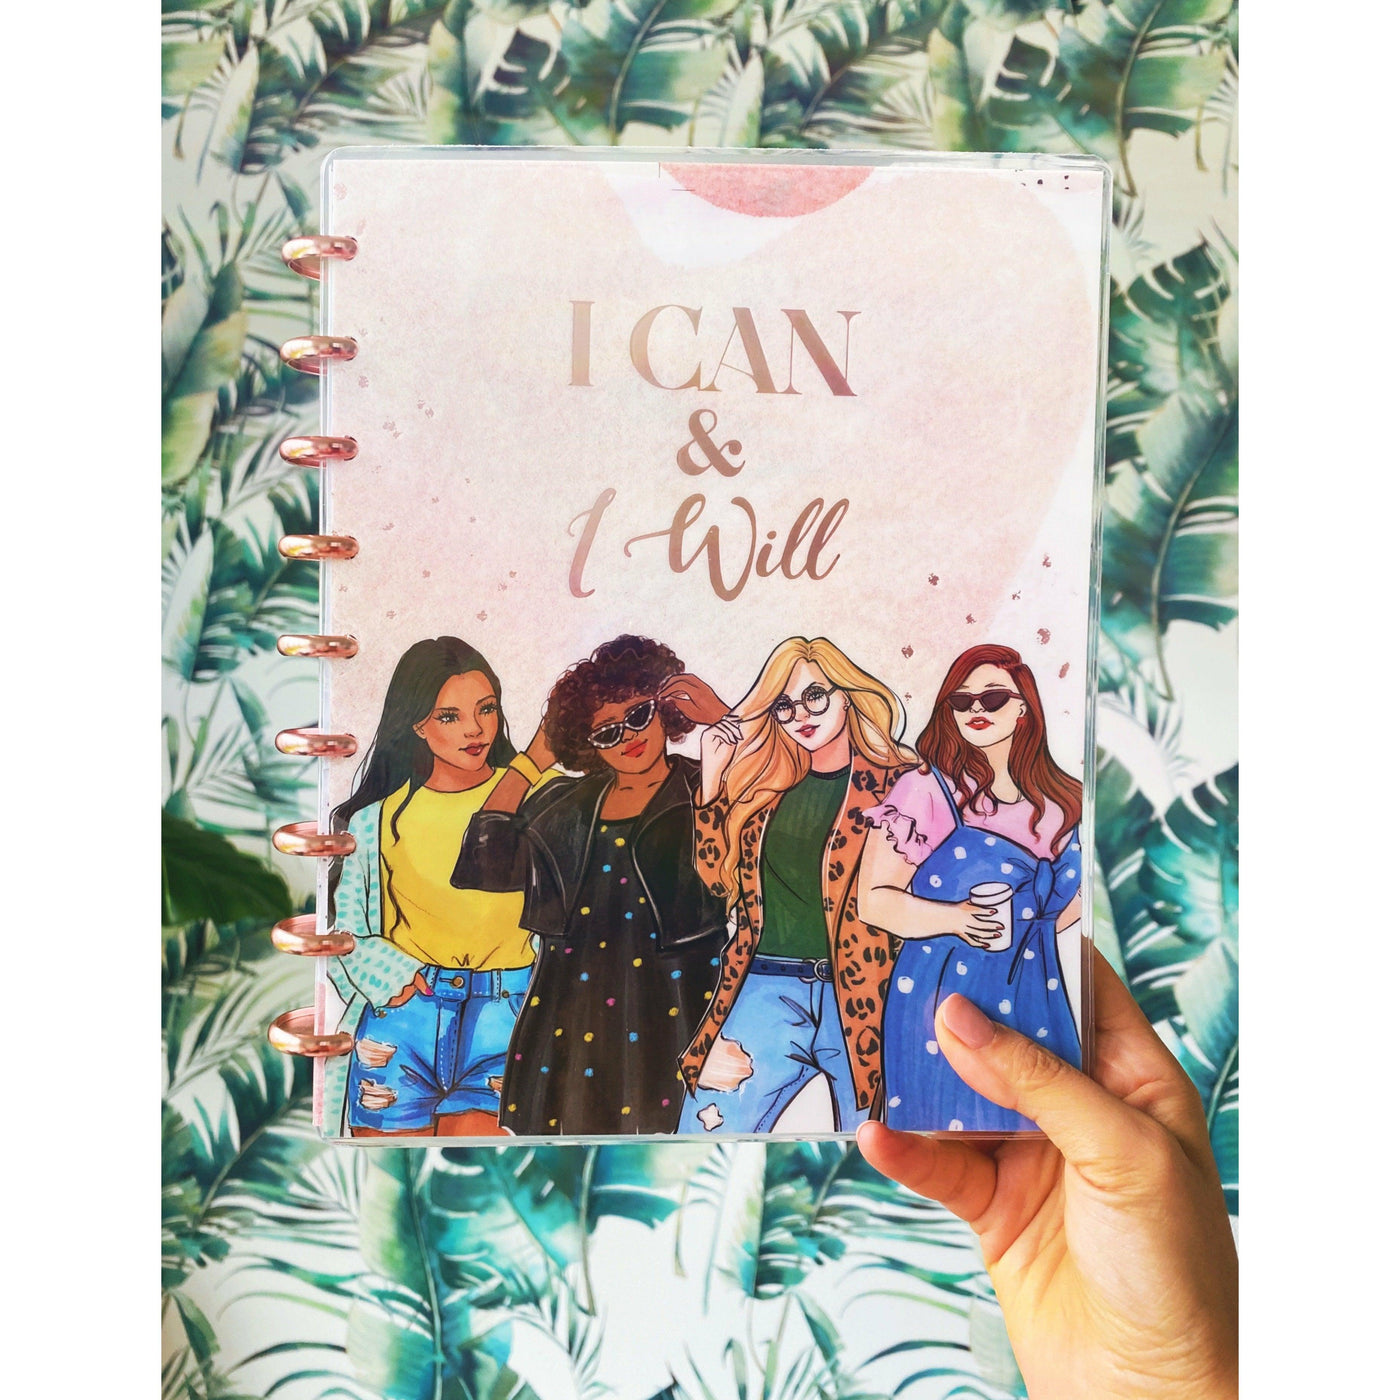 Premium Discbound 2022 "I can & I will" Planner - Undated - 12 Months Front Cover by Rongrong DeVoe